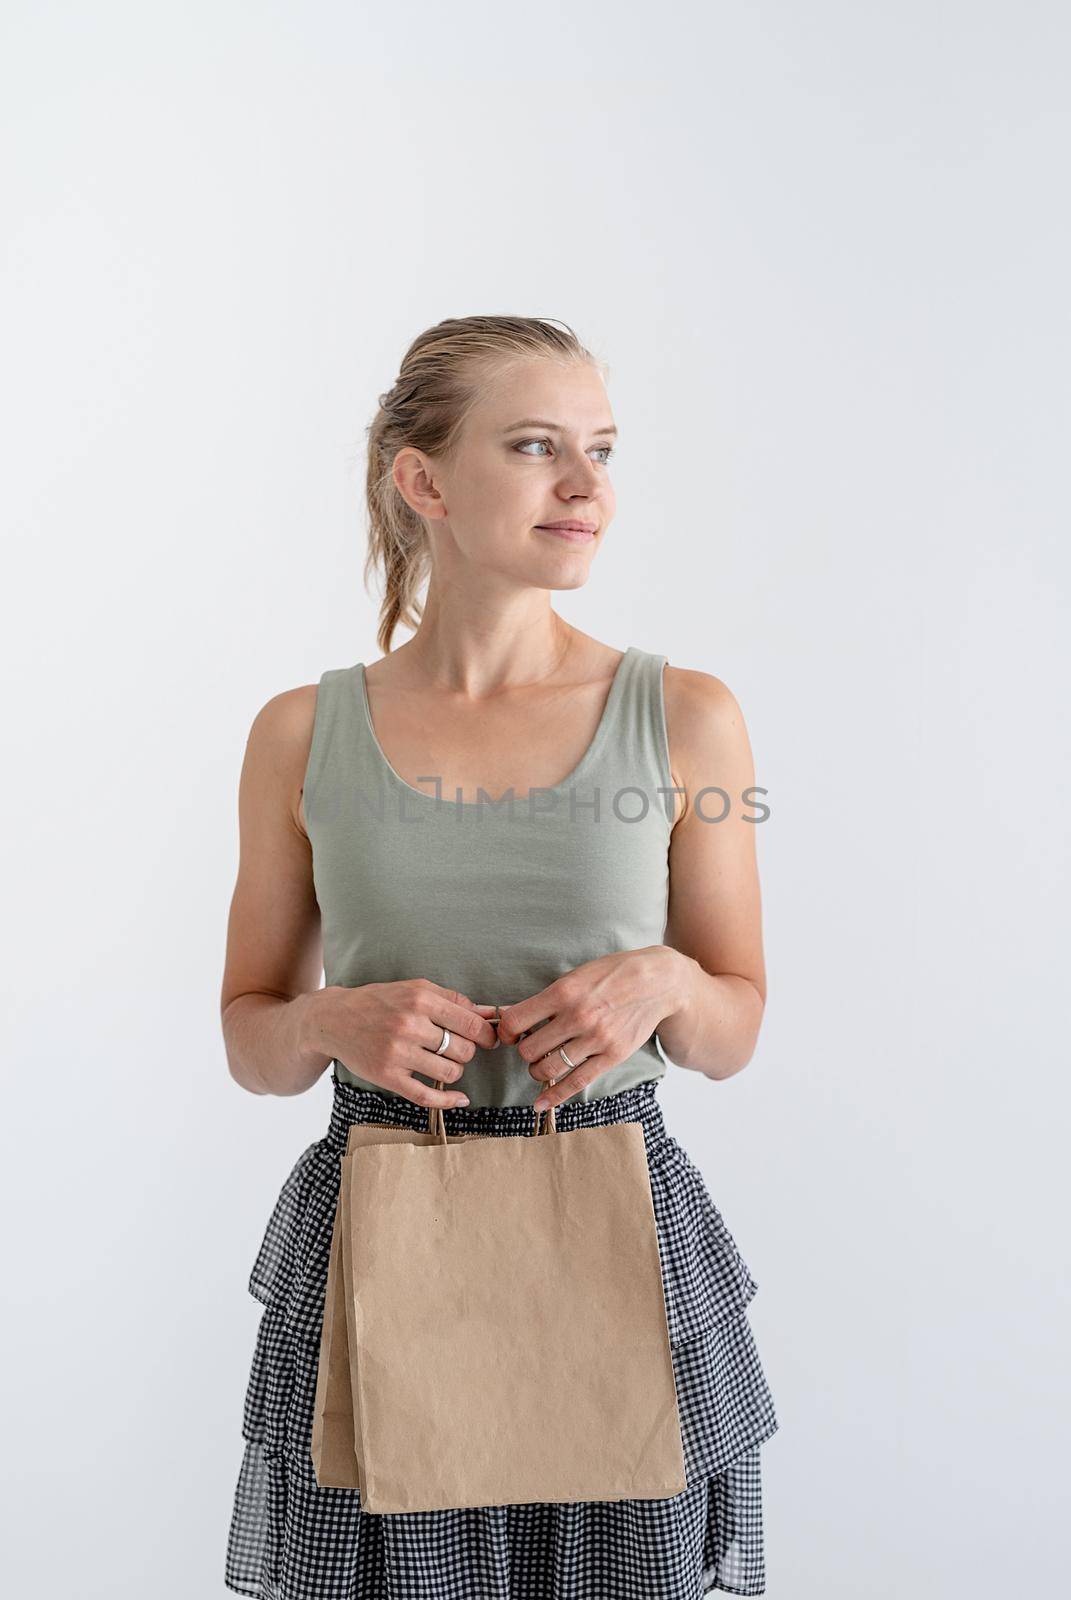 Online shopping concept. Young smiling woman holding eco friendly shopping bags